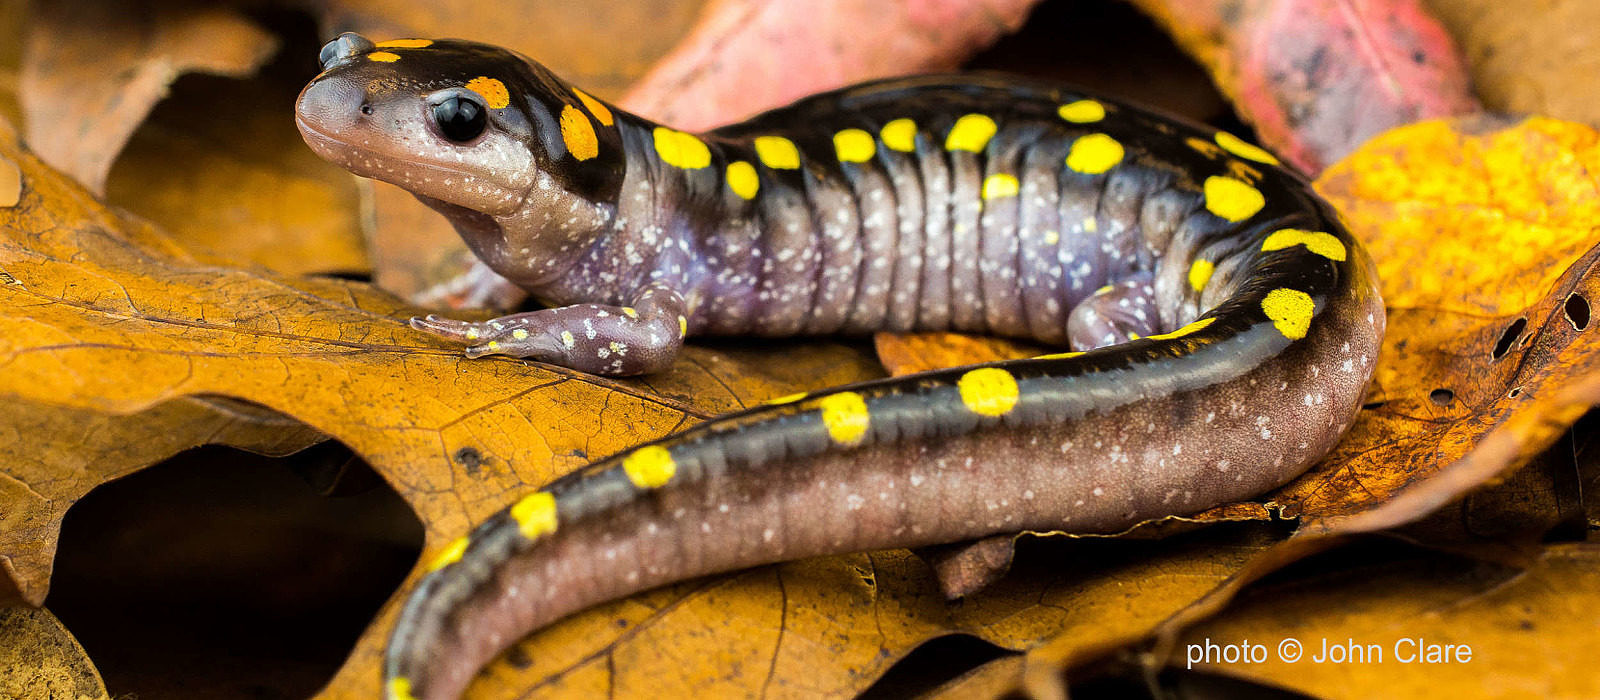 A gorgeous spotted salamander rests on leaf litter. (photo © John Clare)